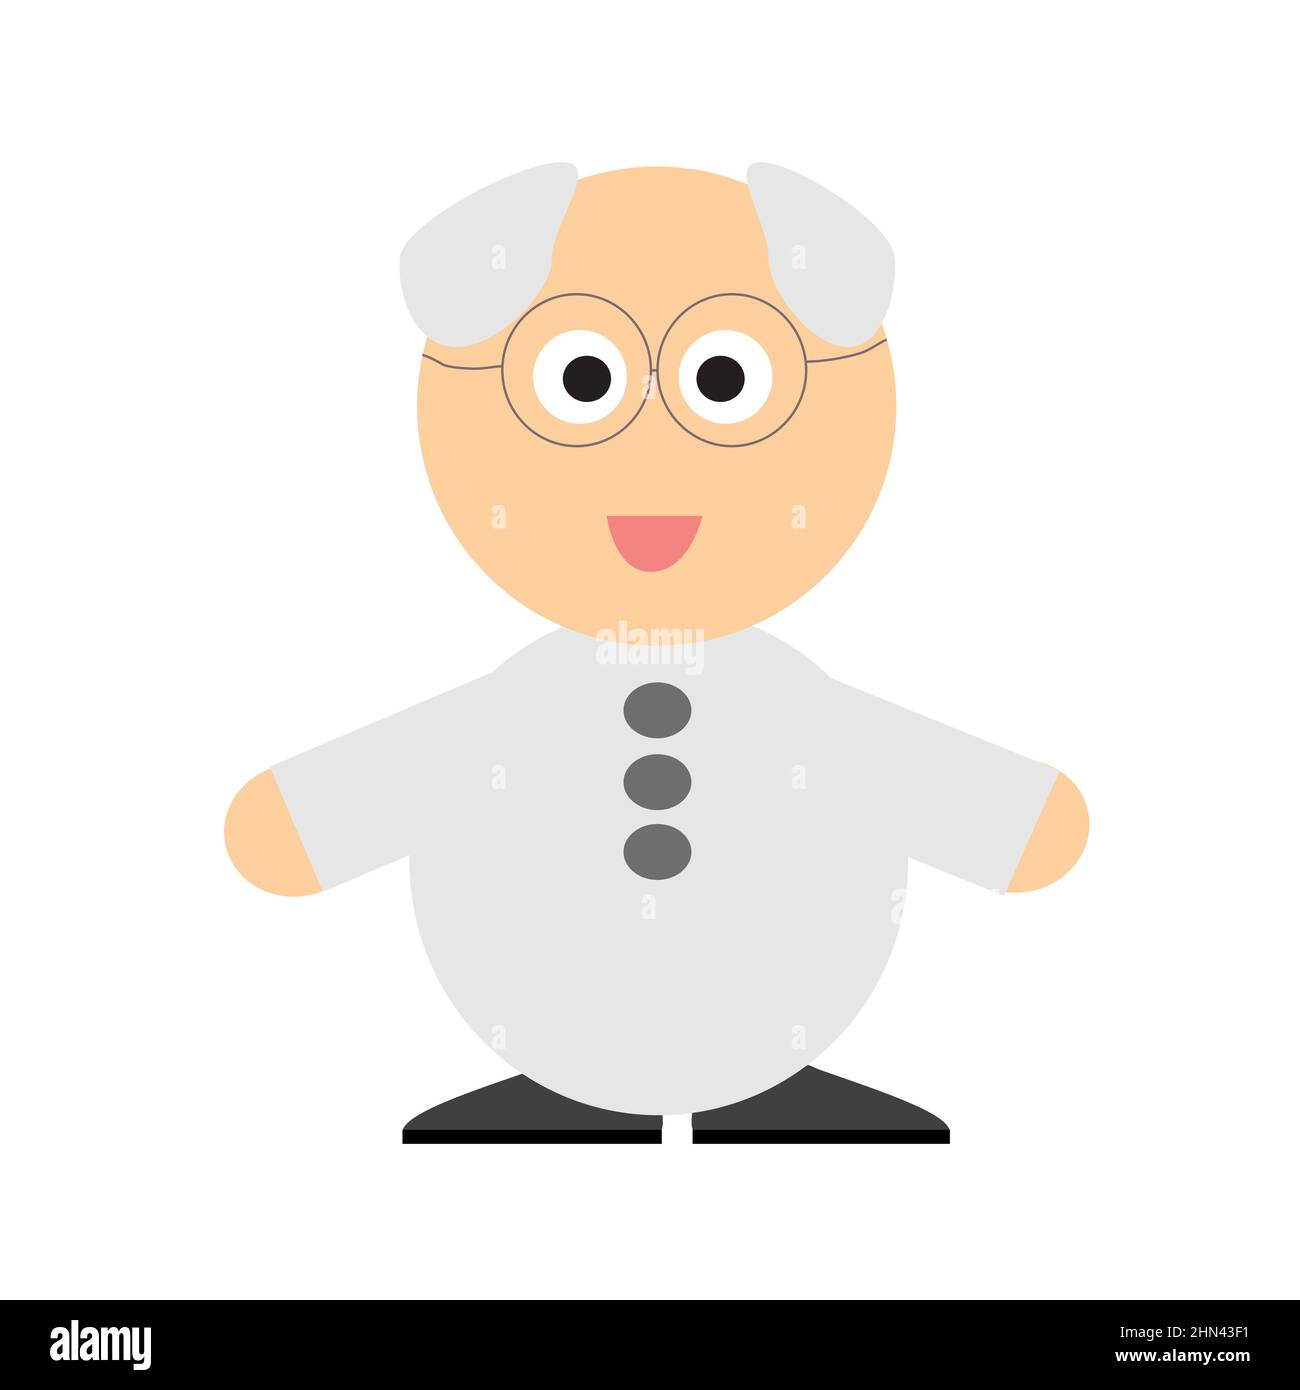 Smiling man face with white hair wearing glasses. Male face. Man professor, scientist or doctor avatar. Isolated flat vector illustration. Stock Vector